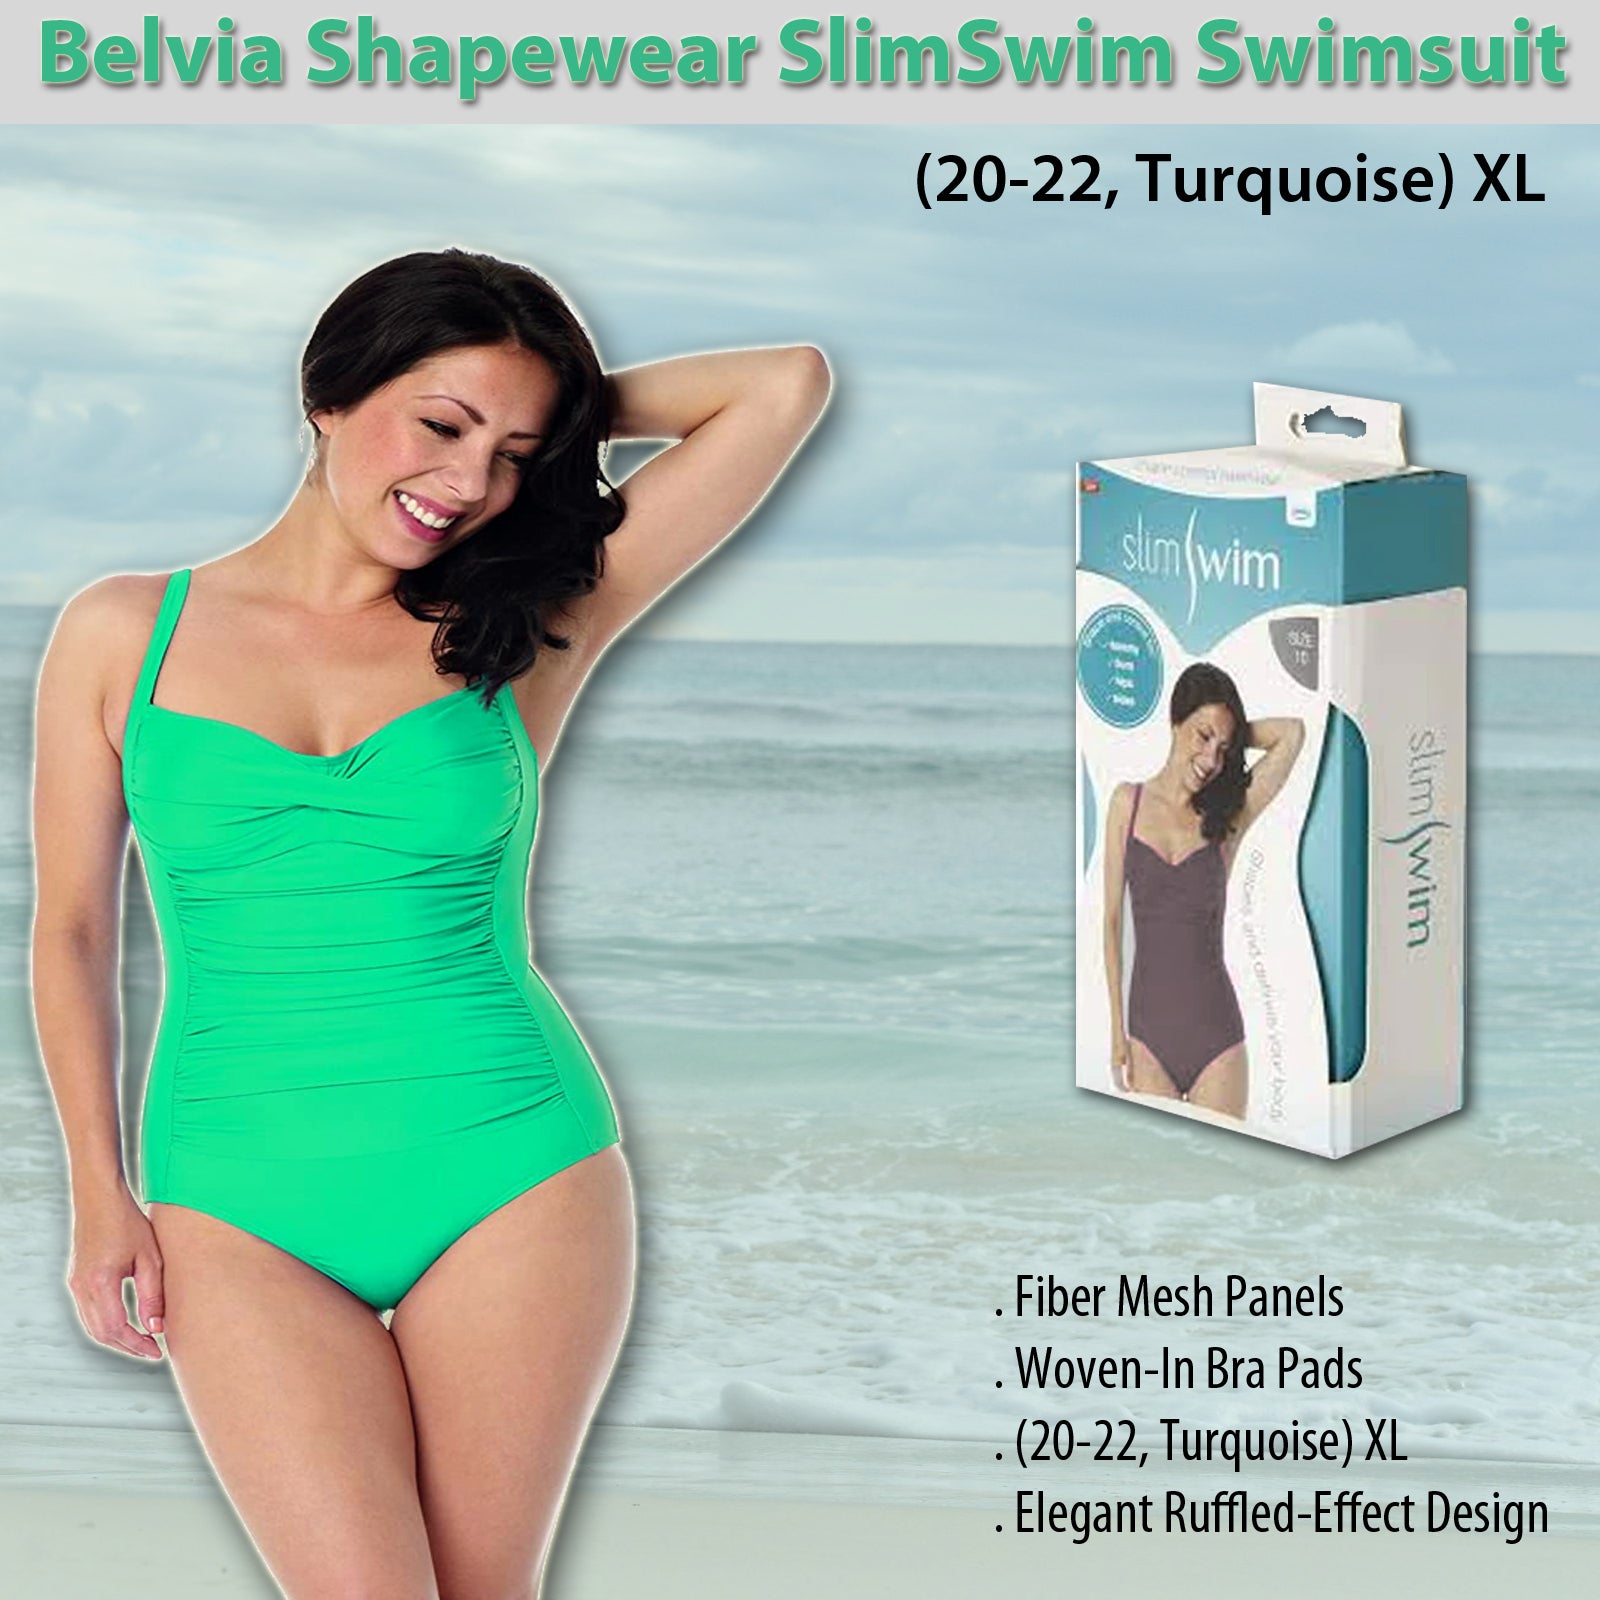 Shop for Swimsuits, Shapewear, Womens